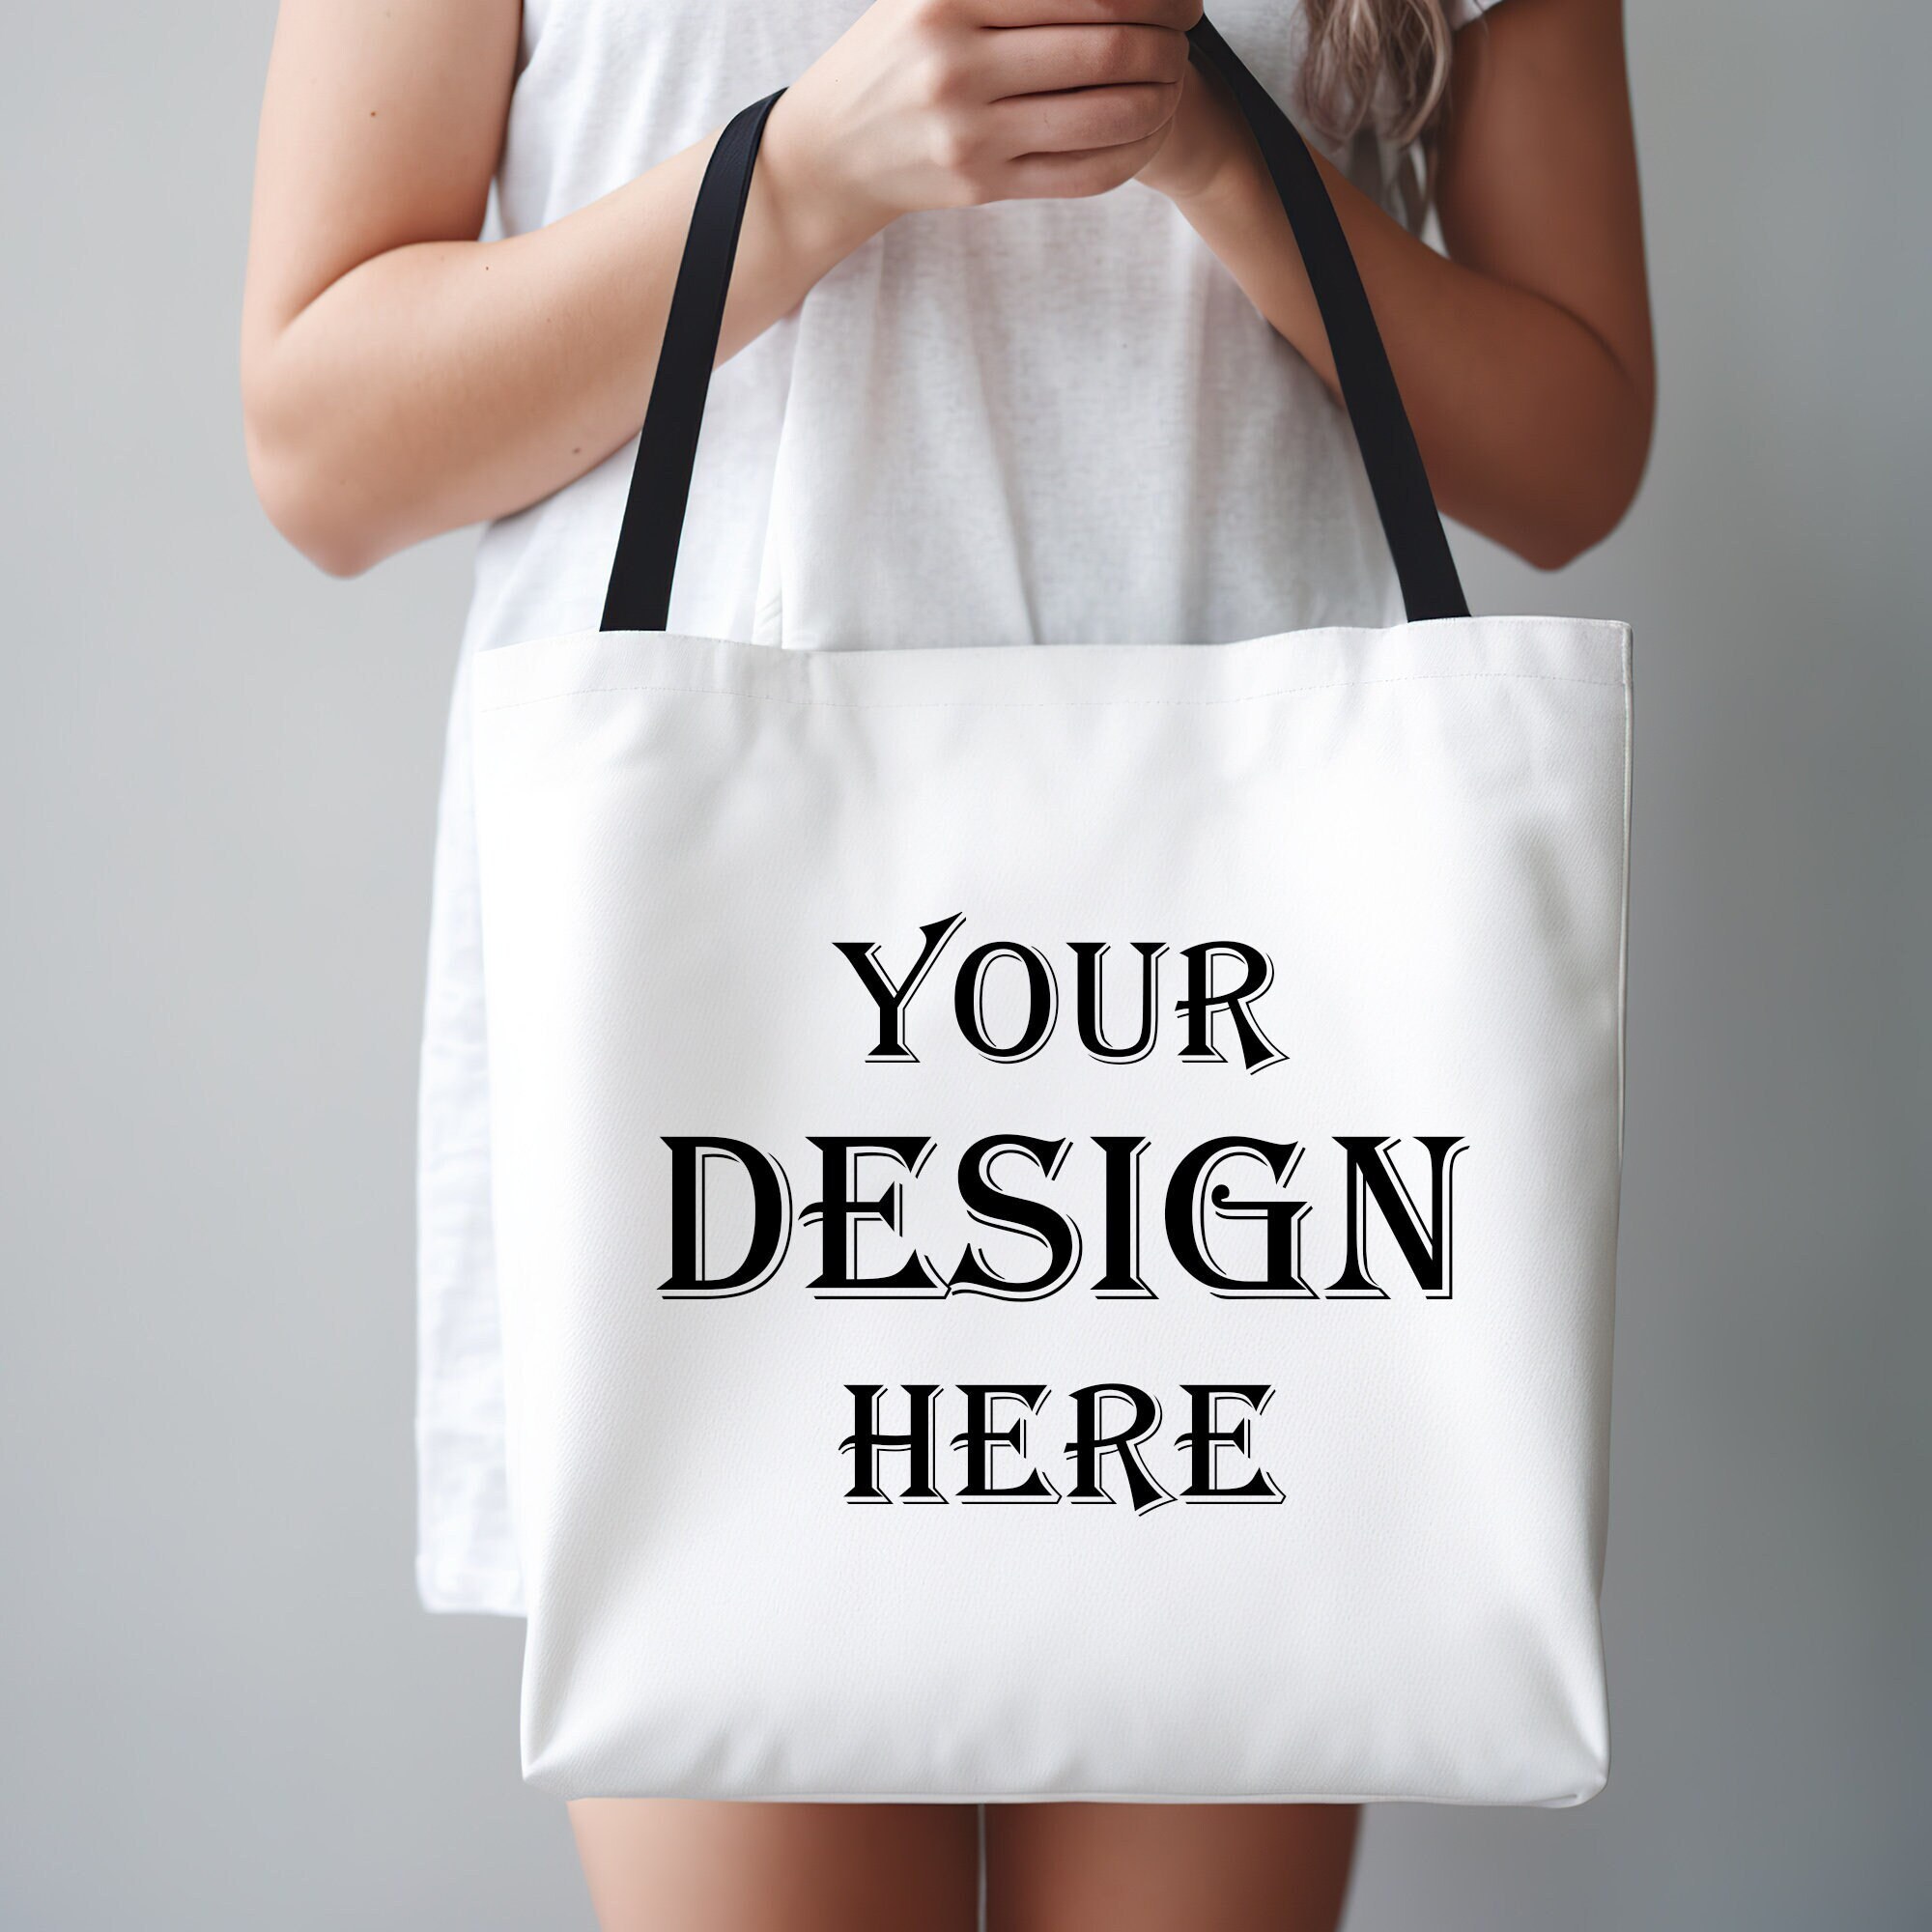  kvtiwee Custom Tote Bags Women Large With Your Photos